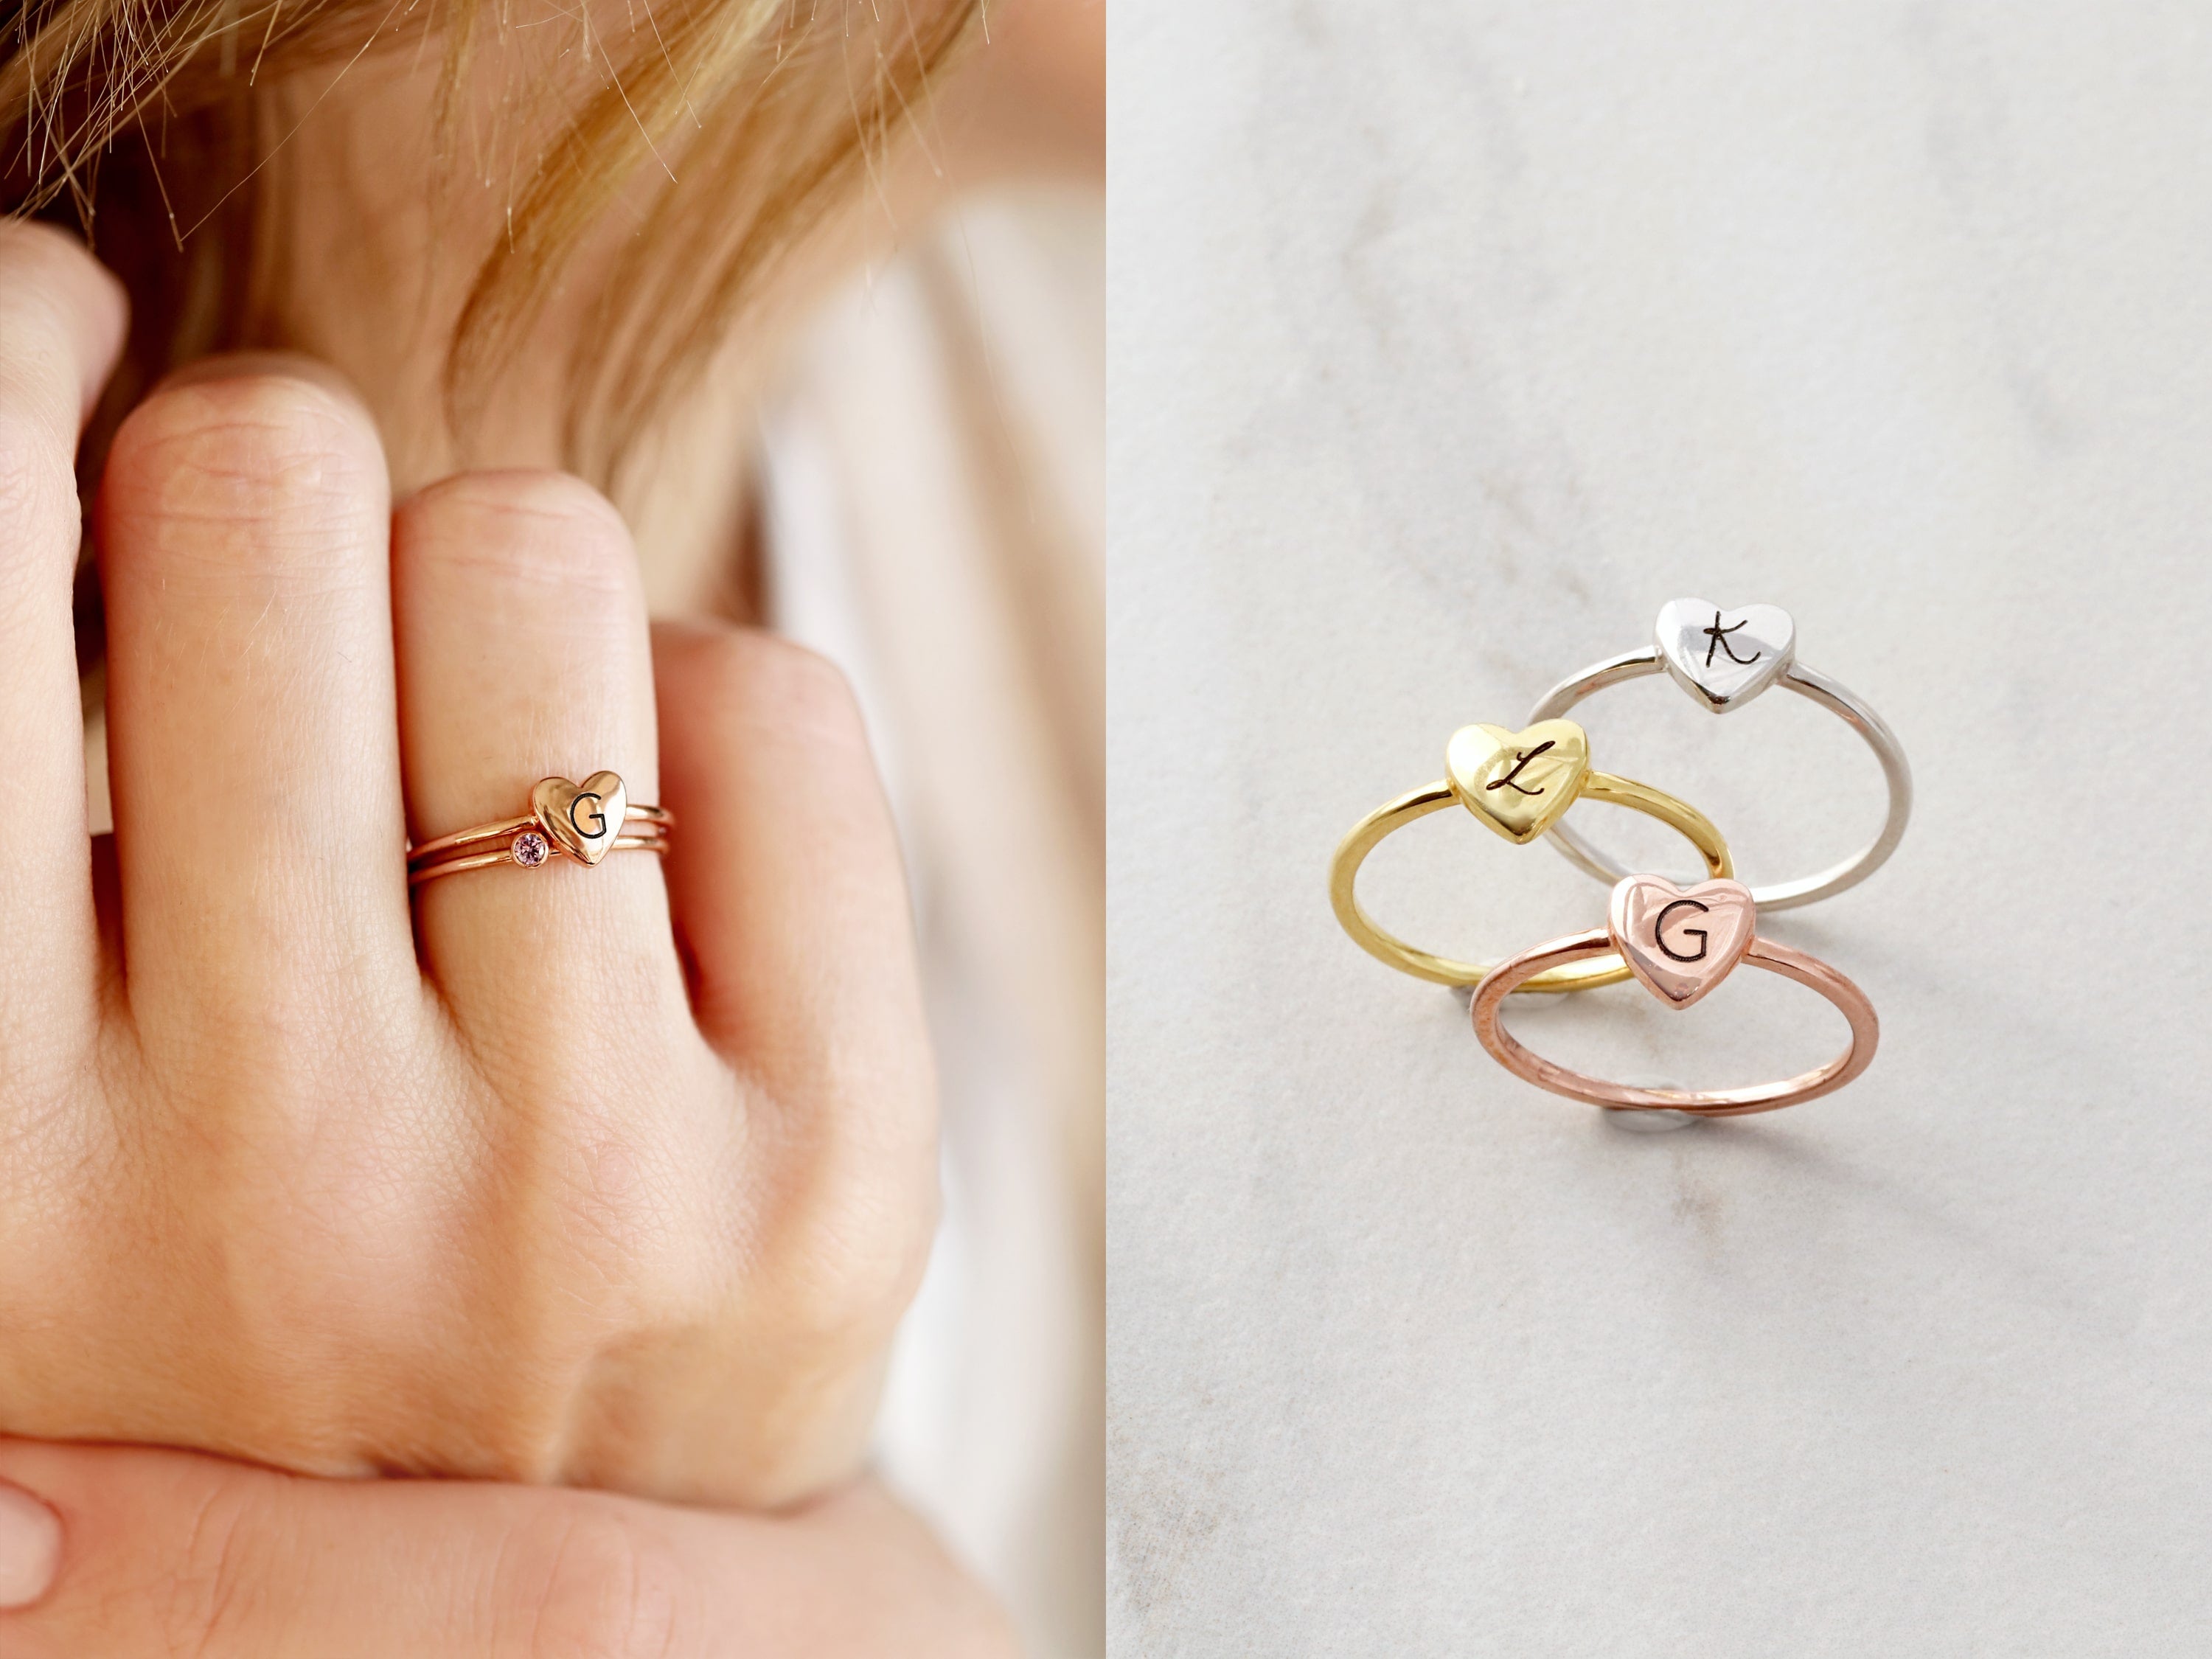 Elegant and Minimalist Rings for Everyday Wear